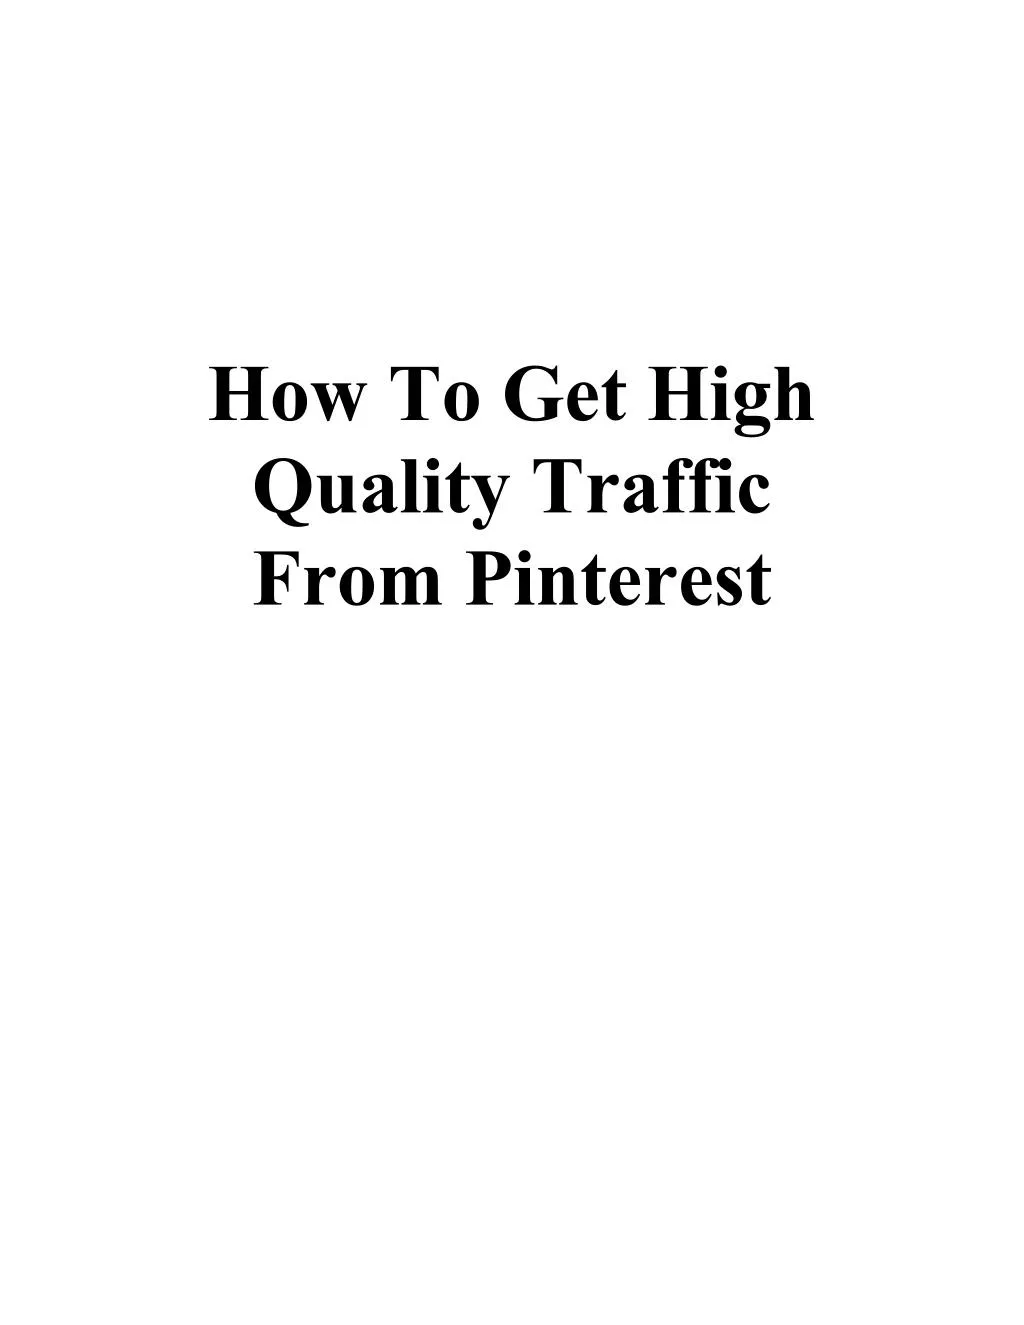 how to get high quality traffic from pinterest